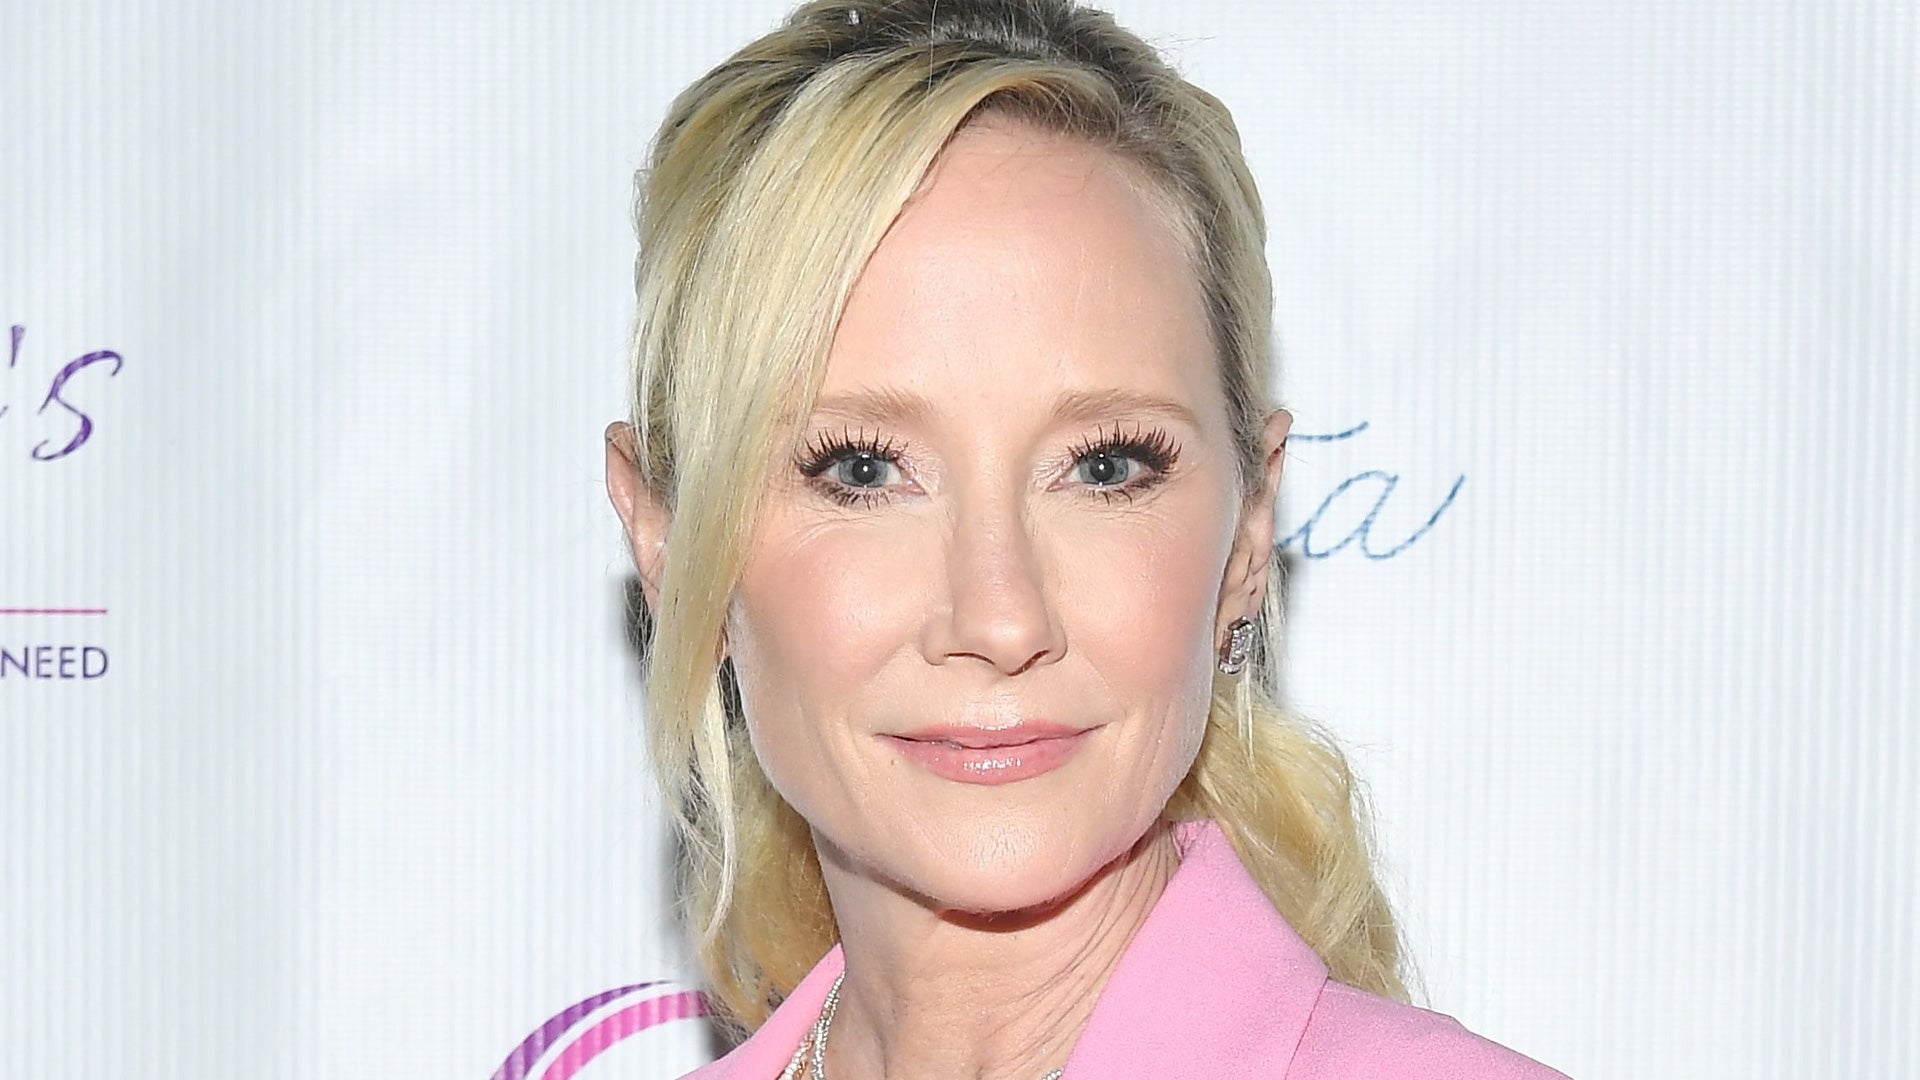 Anne Heche Had ‘Narcotics’ in Her System at Time of Near-Fatal Car Crash